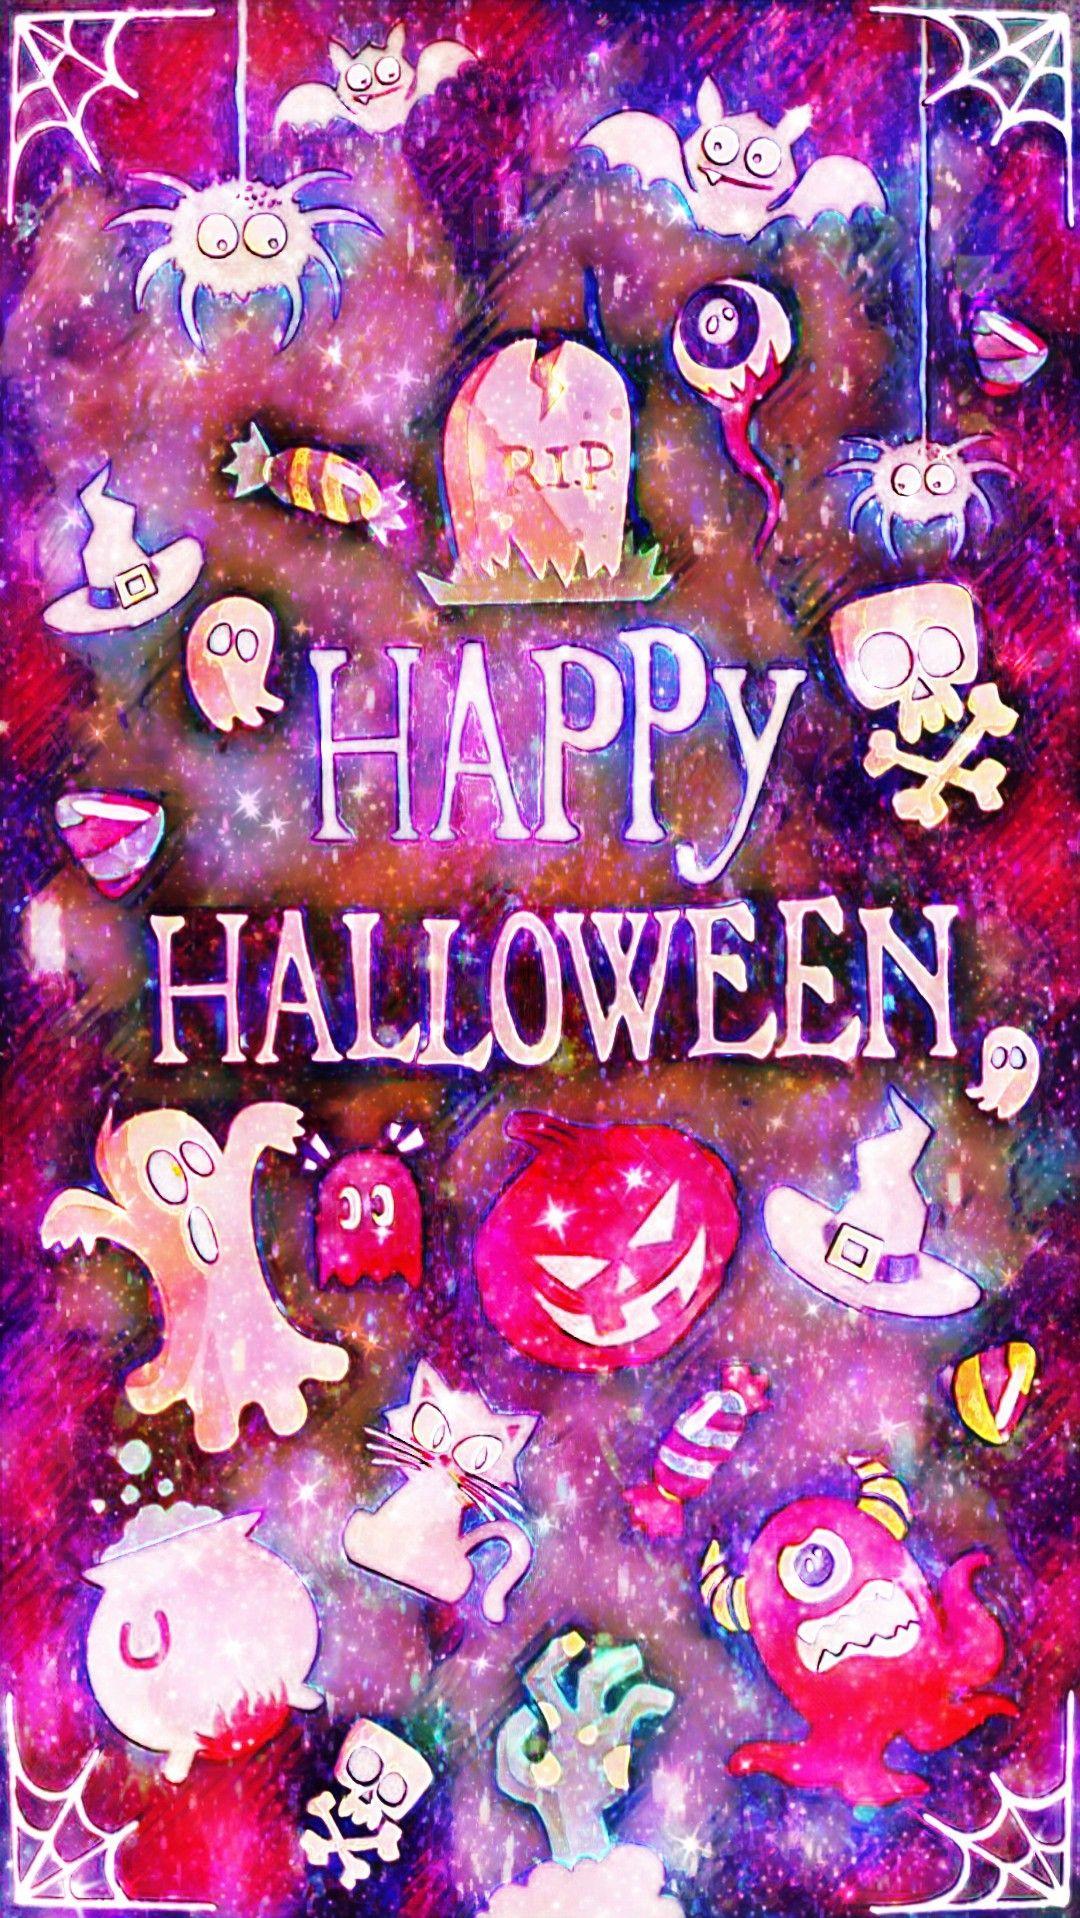 Happy Halloween Galaxy, made by me #patterns #purple